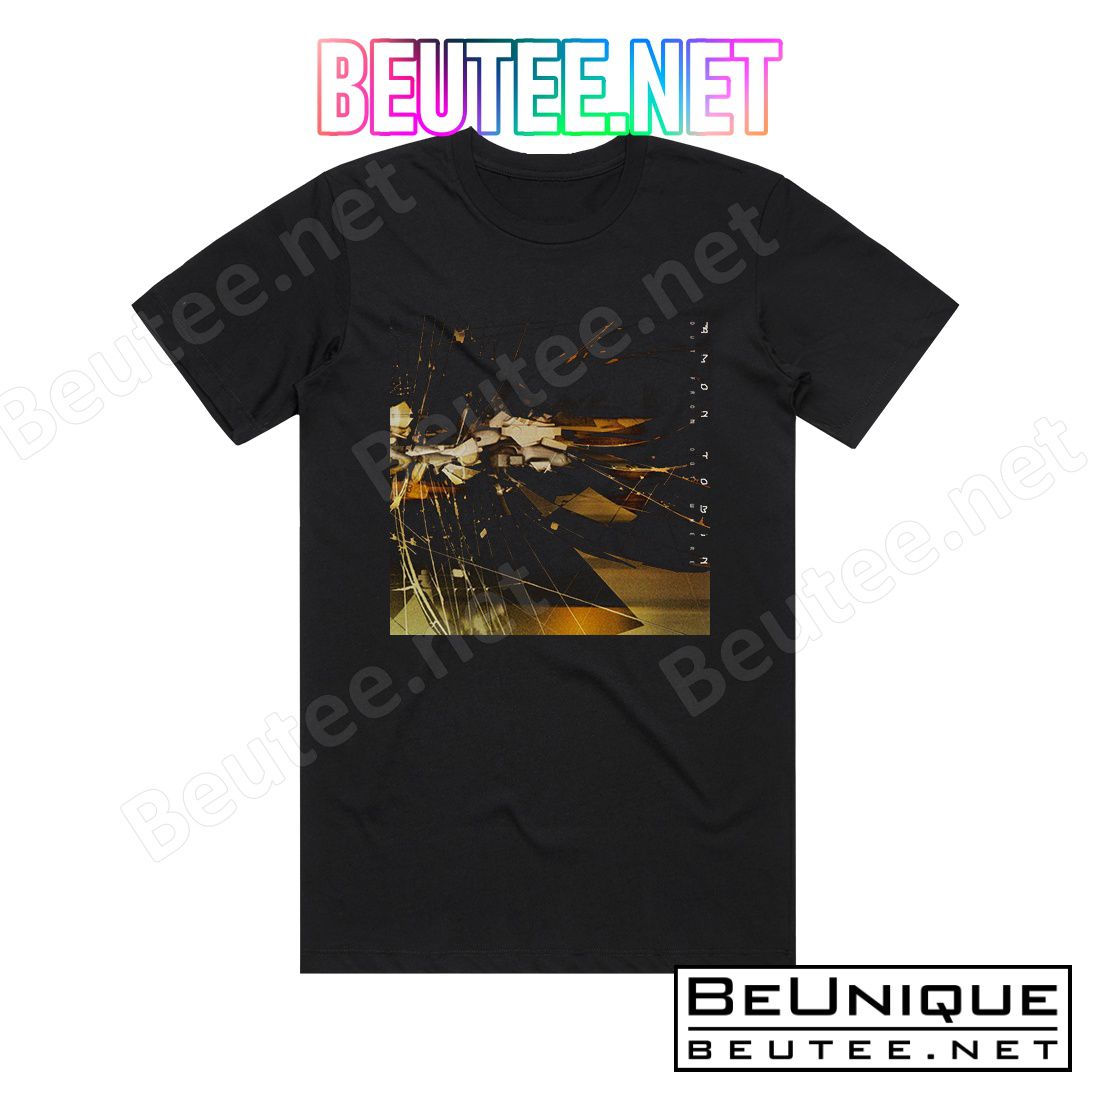 Amon Tobin Out From Out Where Album Cover T-Shirt